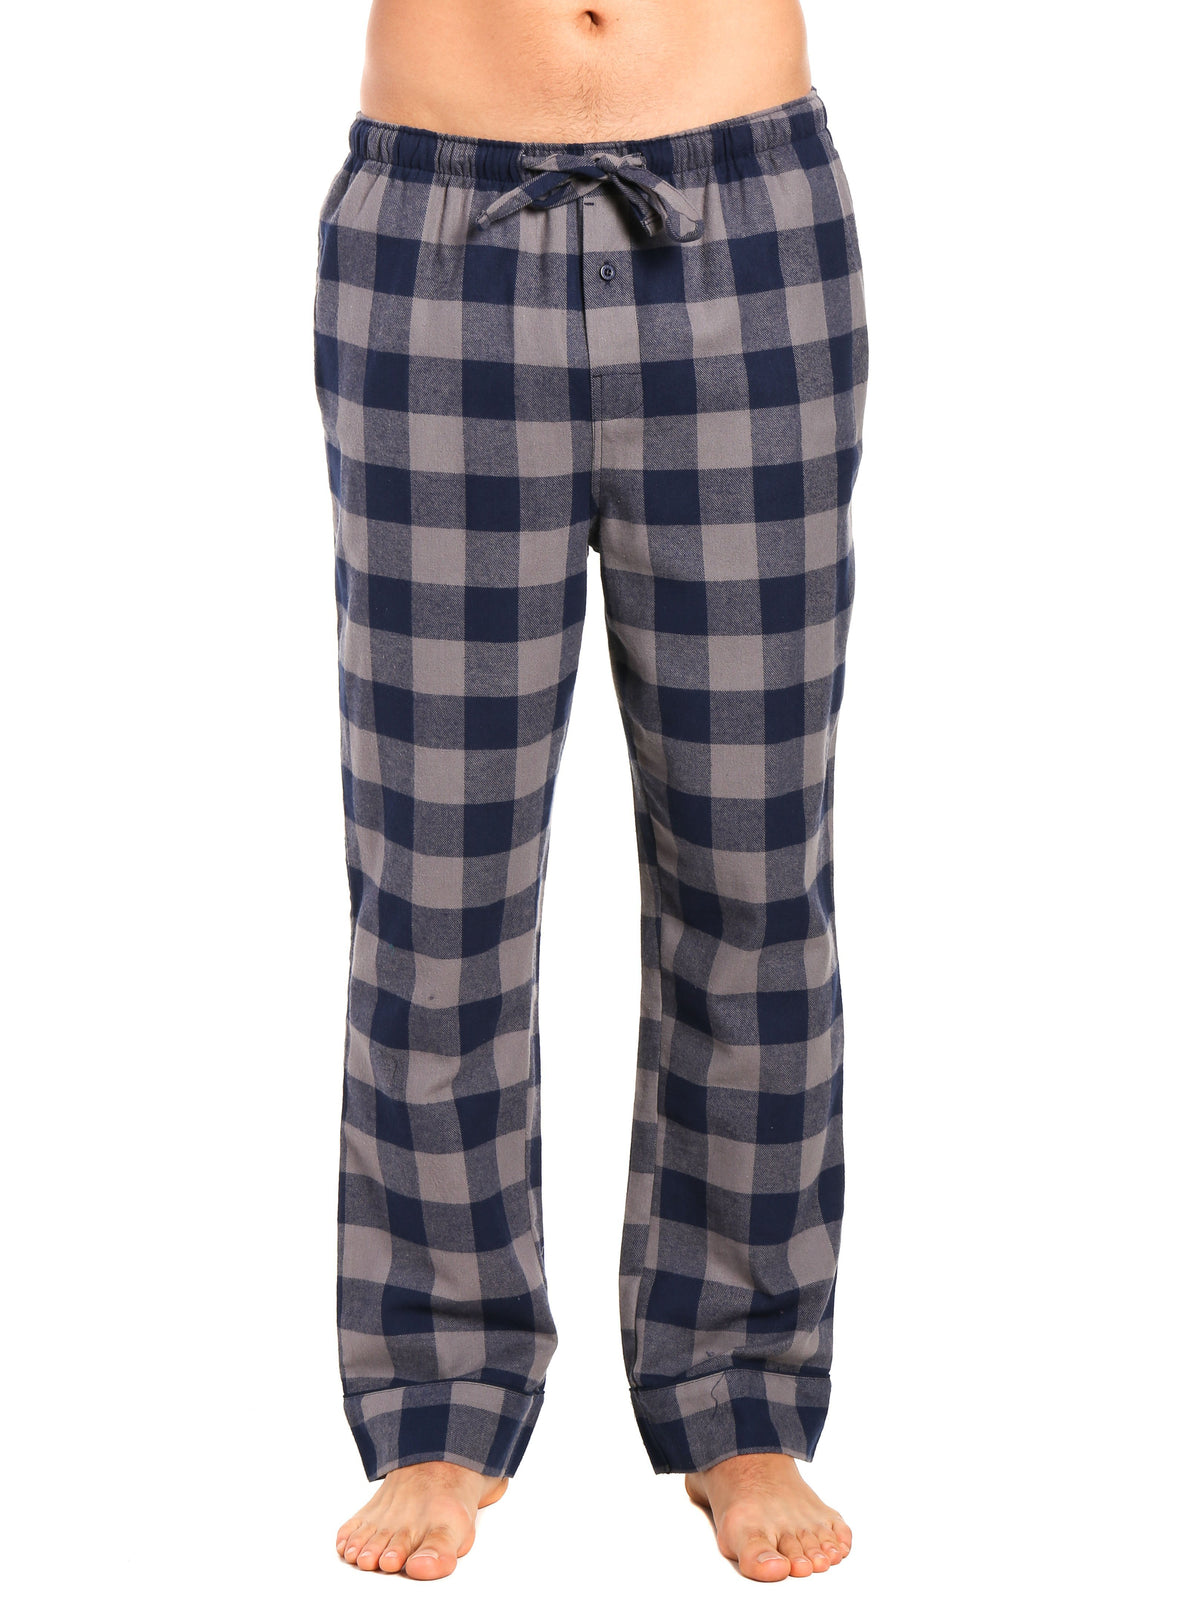 Mens Gingham 100% Cotton Flannel Lounge Pants - Gingham Checks - Charcoal-Navy